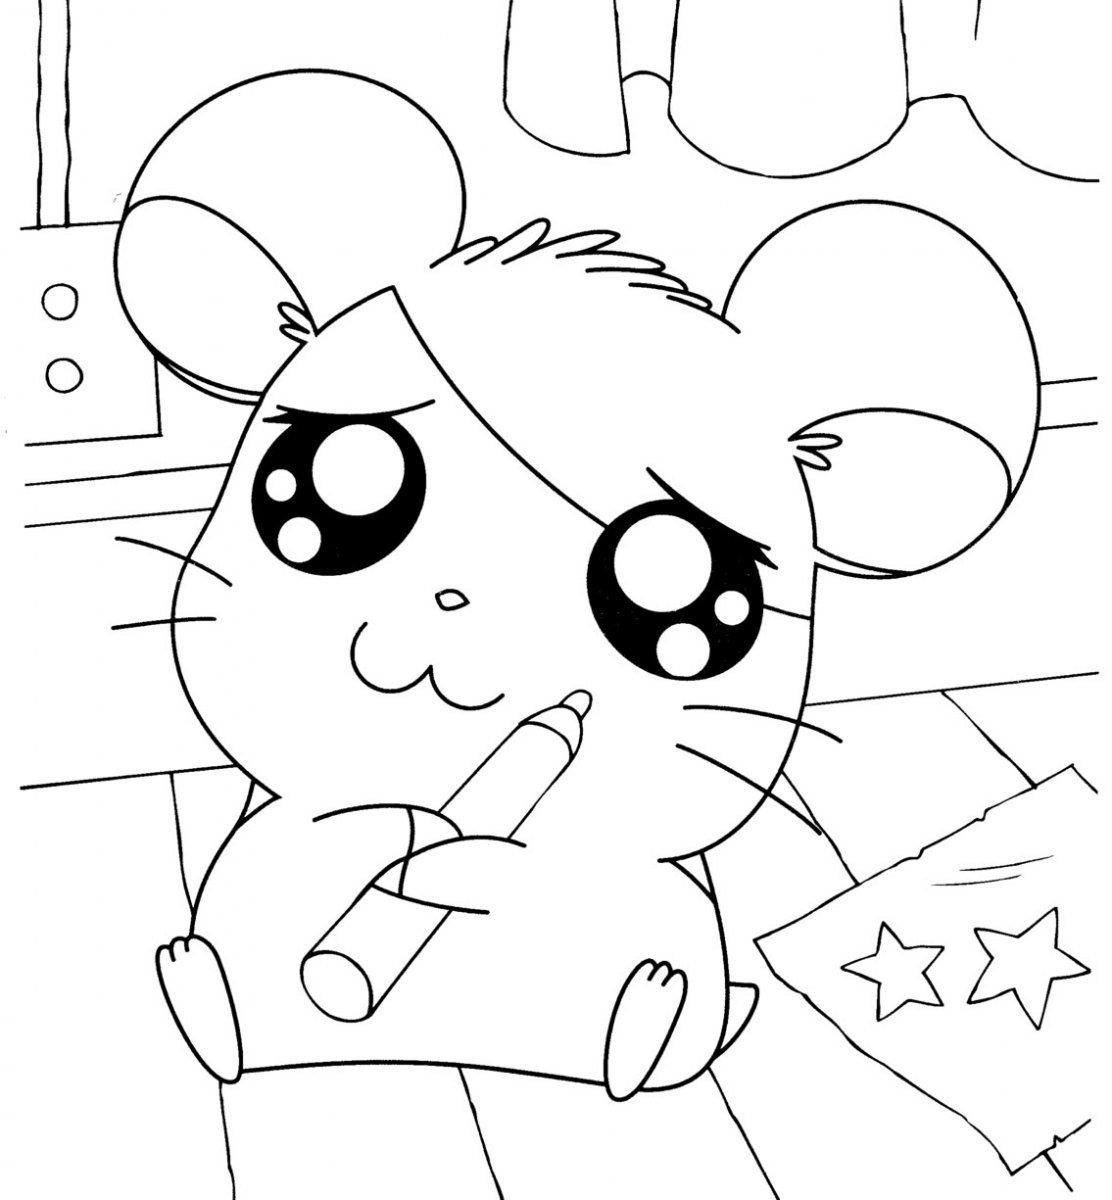 Baby Hamster Coloring Pages
 Hamtaro Coloring Pages Memes Cute Hamster To